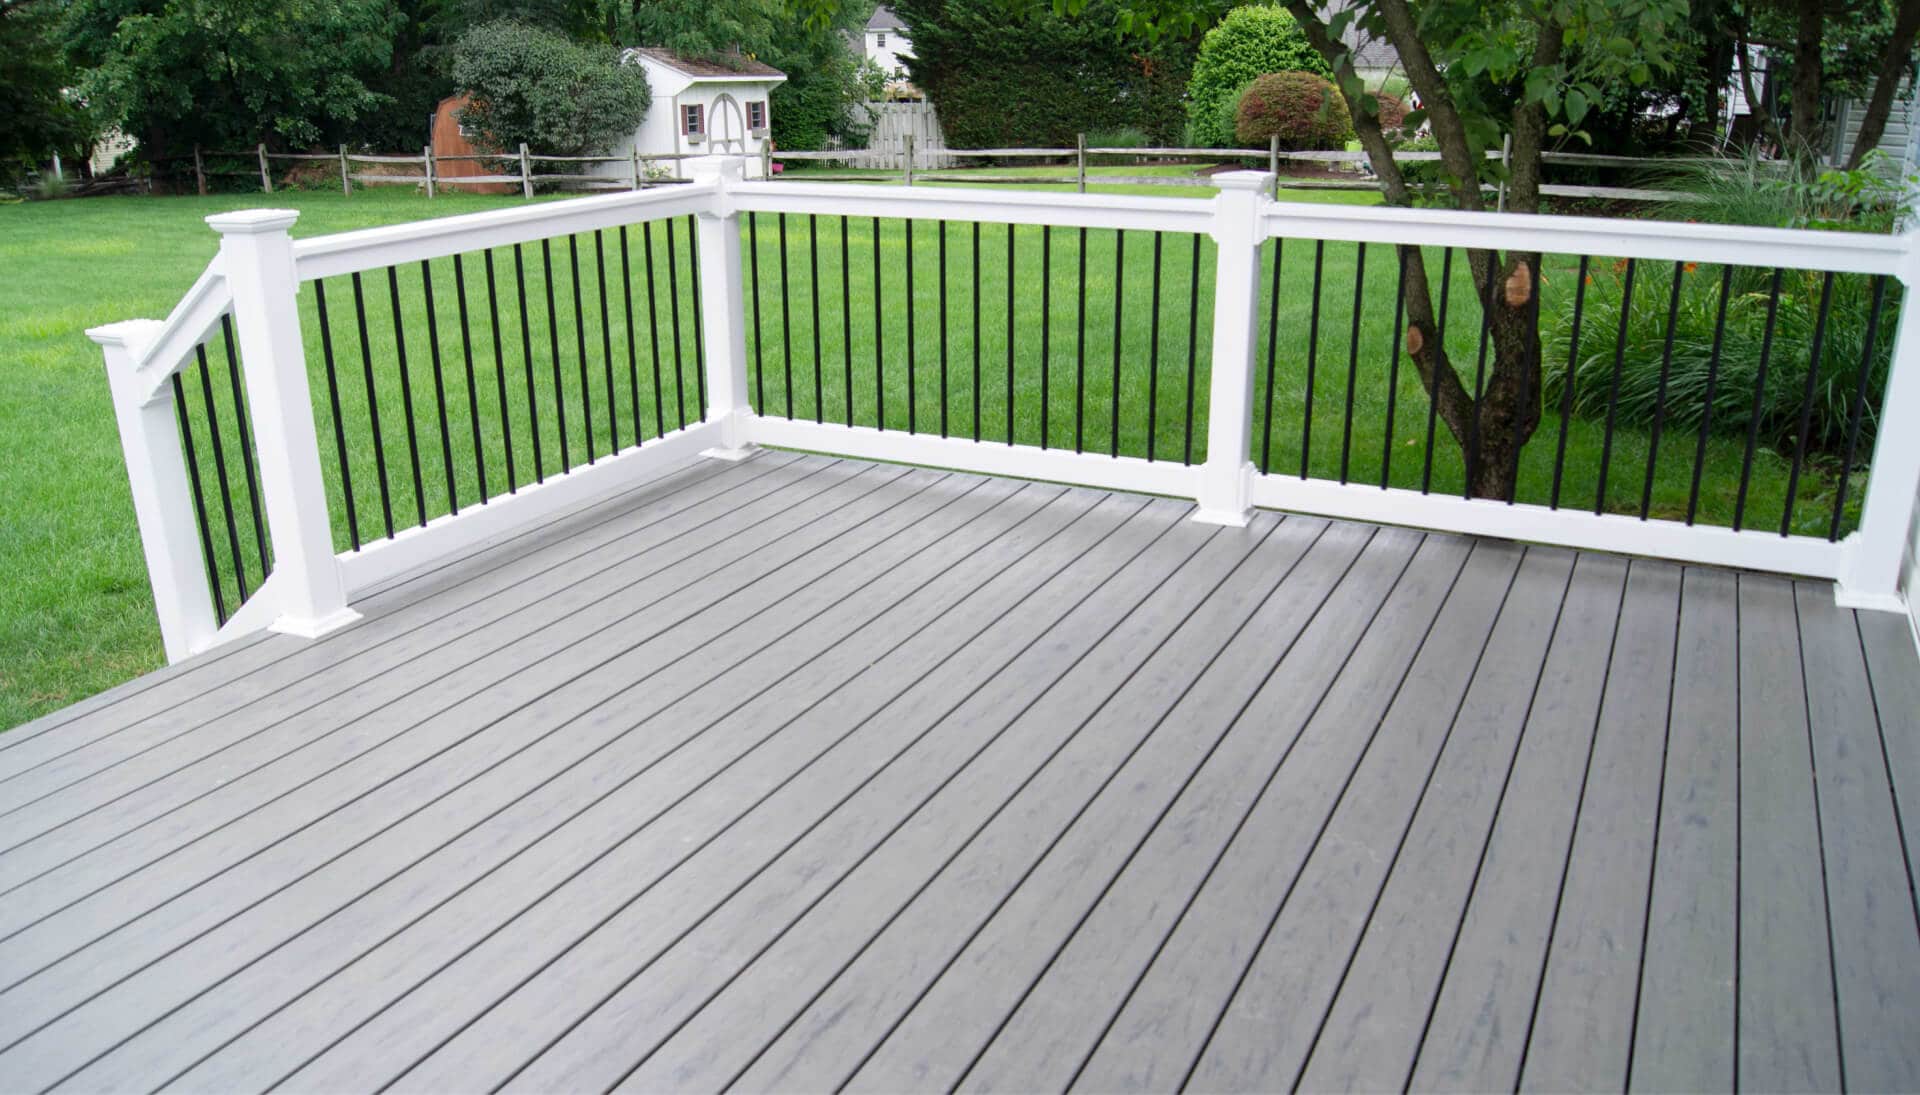 Specialists in deck railing and covers Woodbridge, Virginia